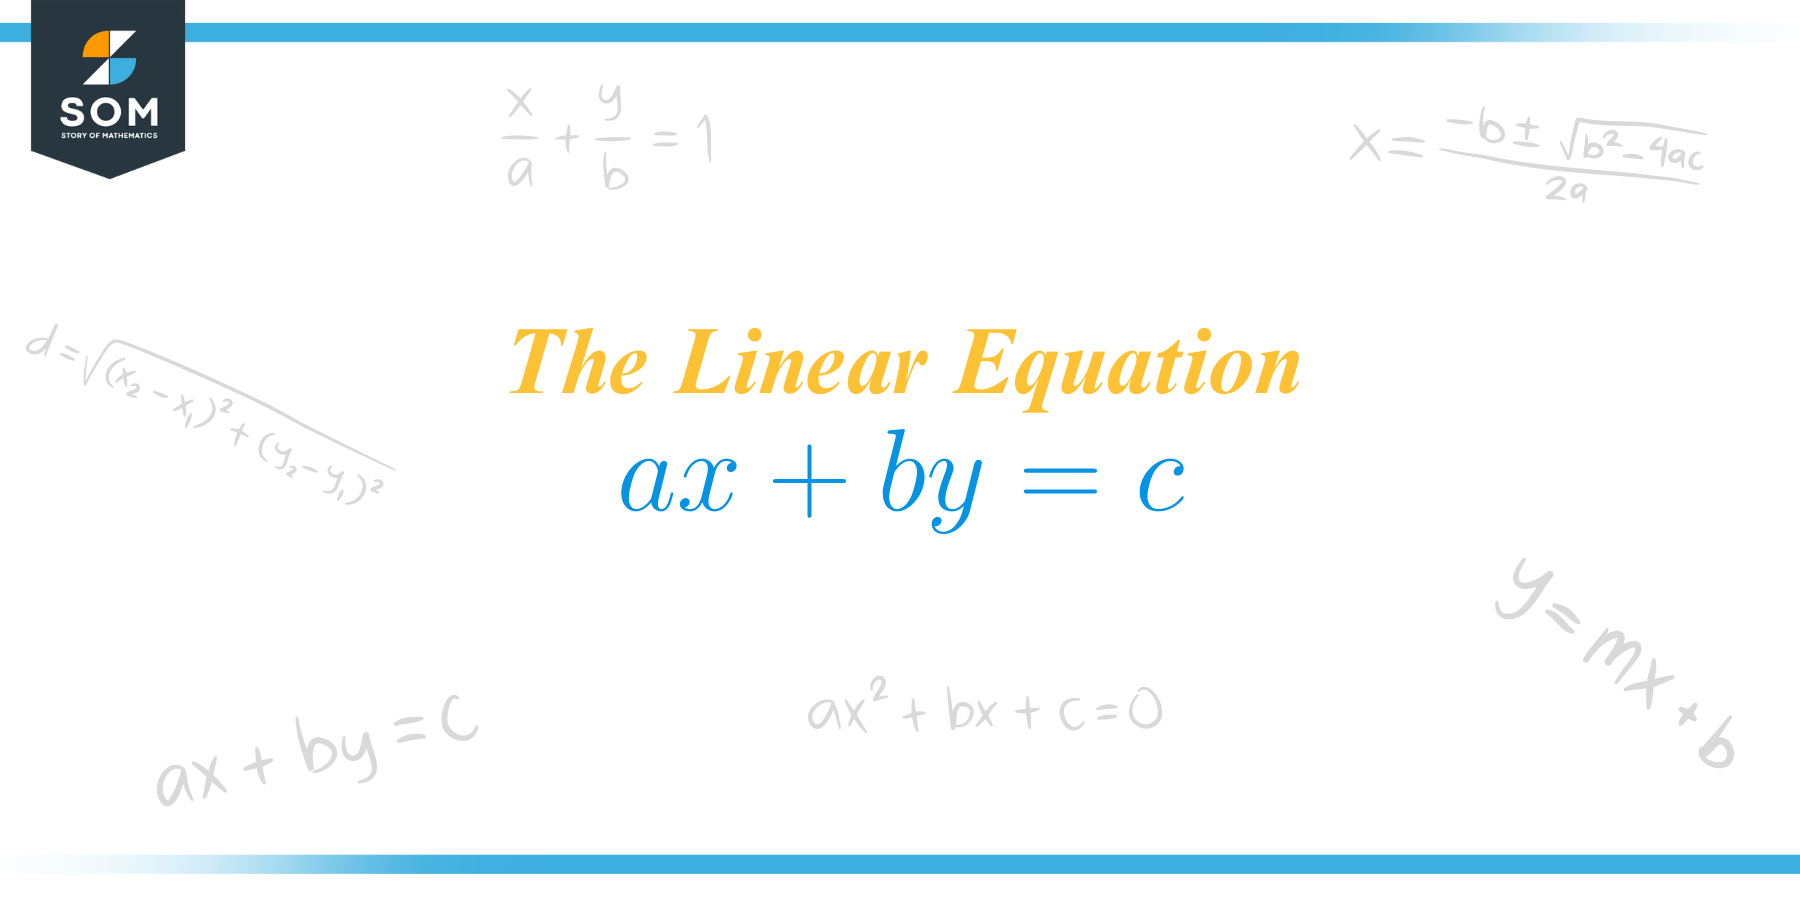 The Linear Equation title